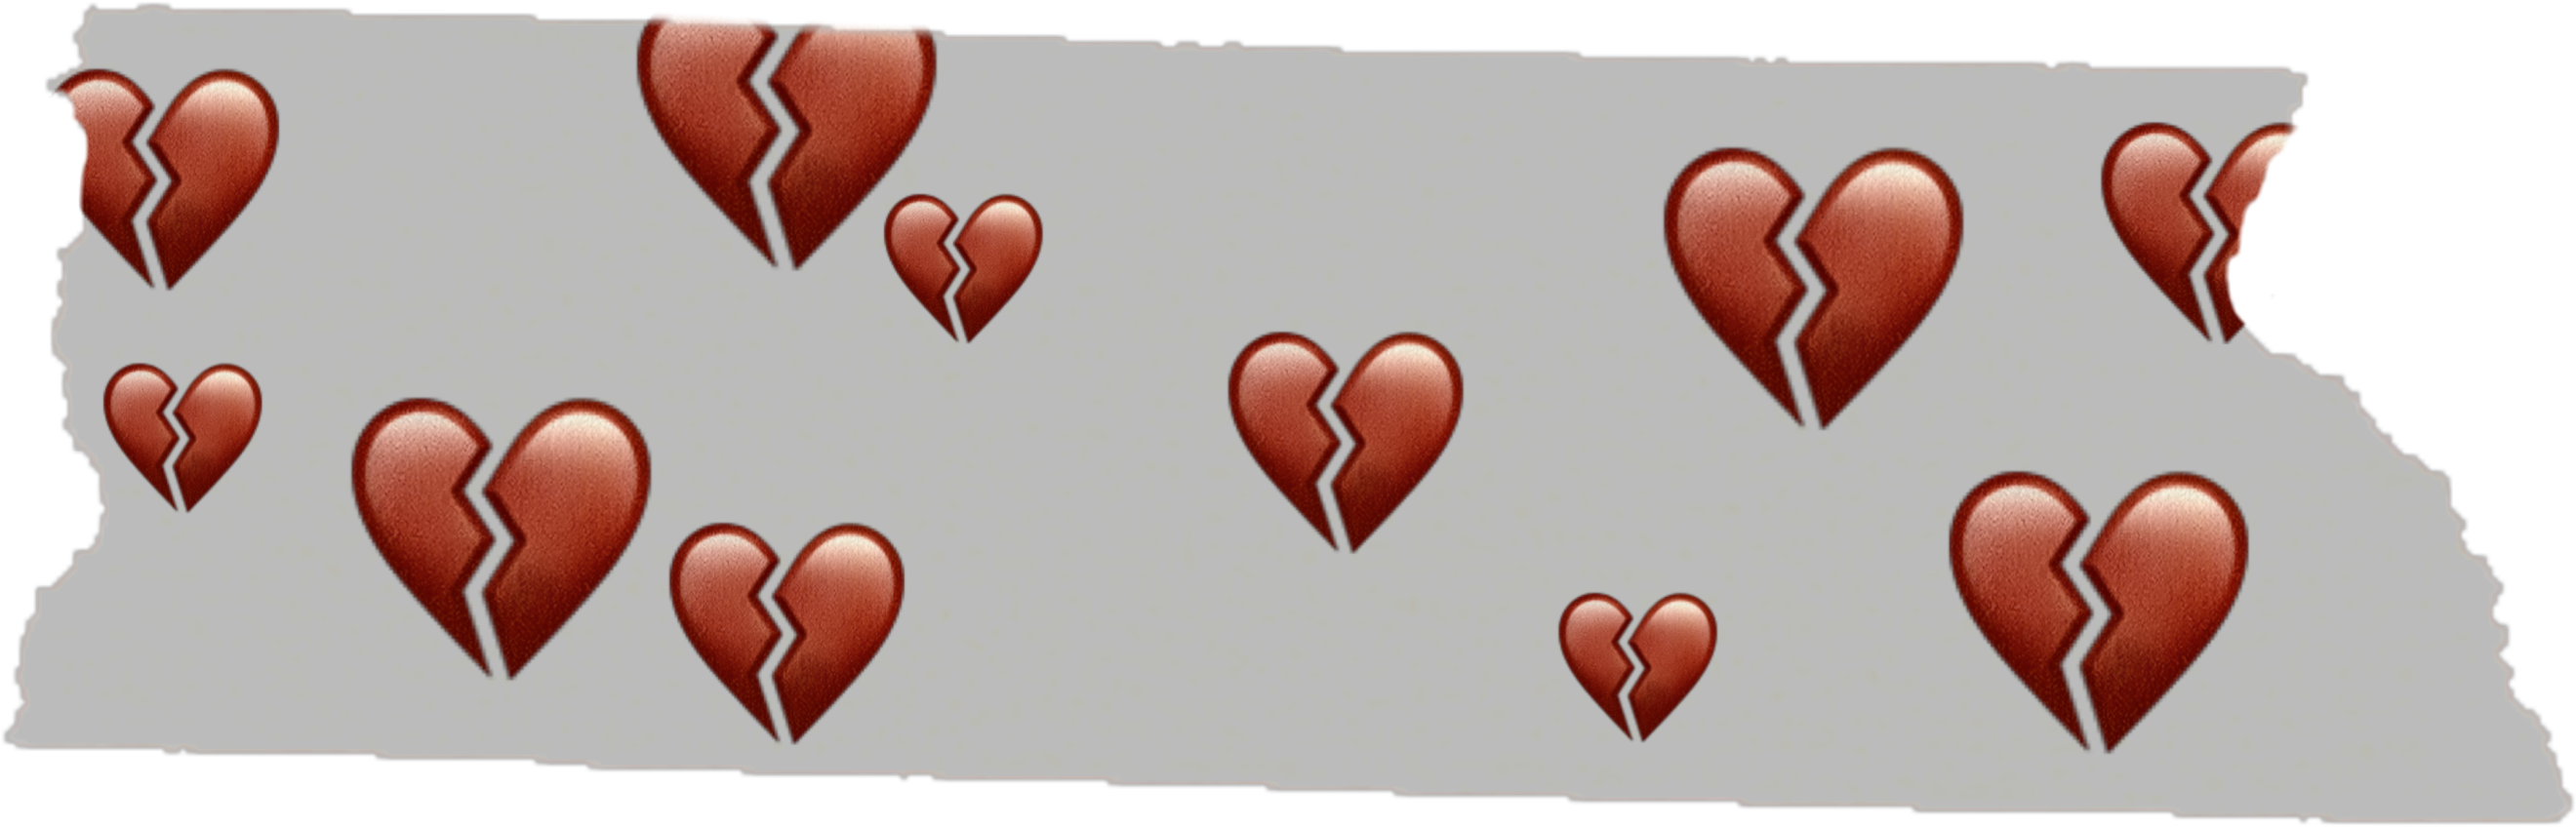 Broken Hearts Taped Together PNG